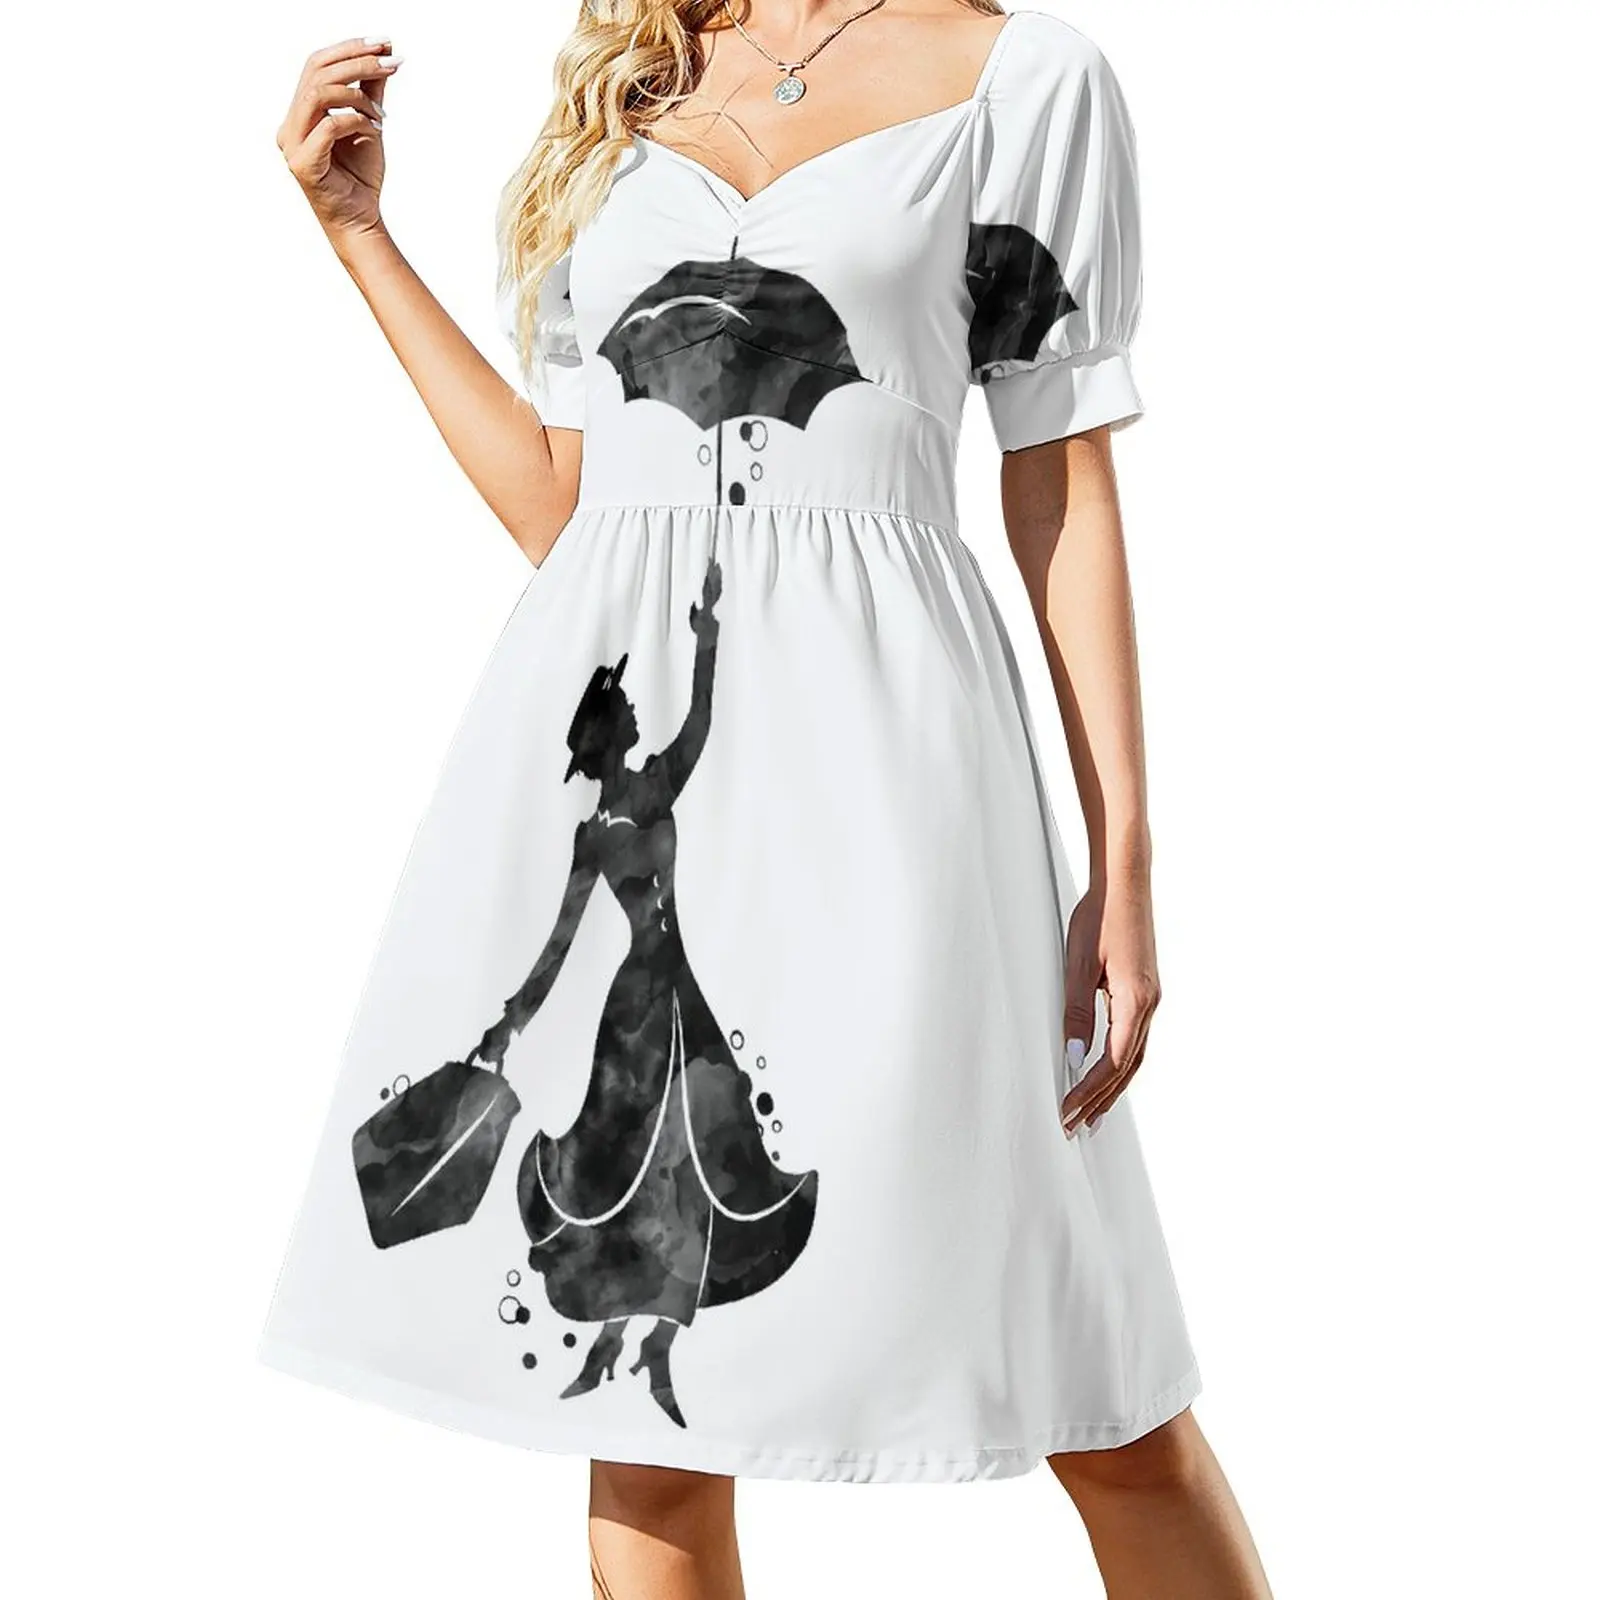 

Mary Poppins Dress prom dress 2023 dresses for special events women's elegant loose dresses